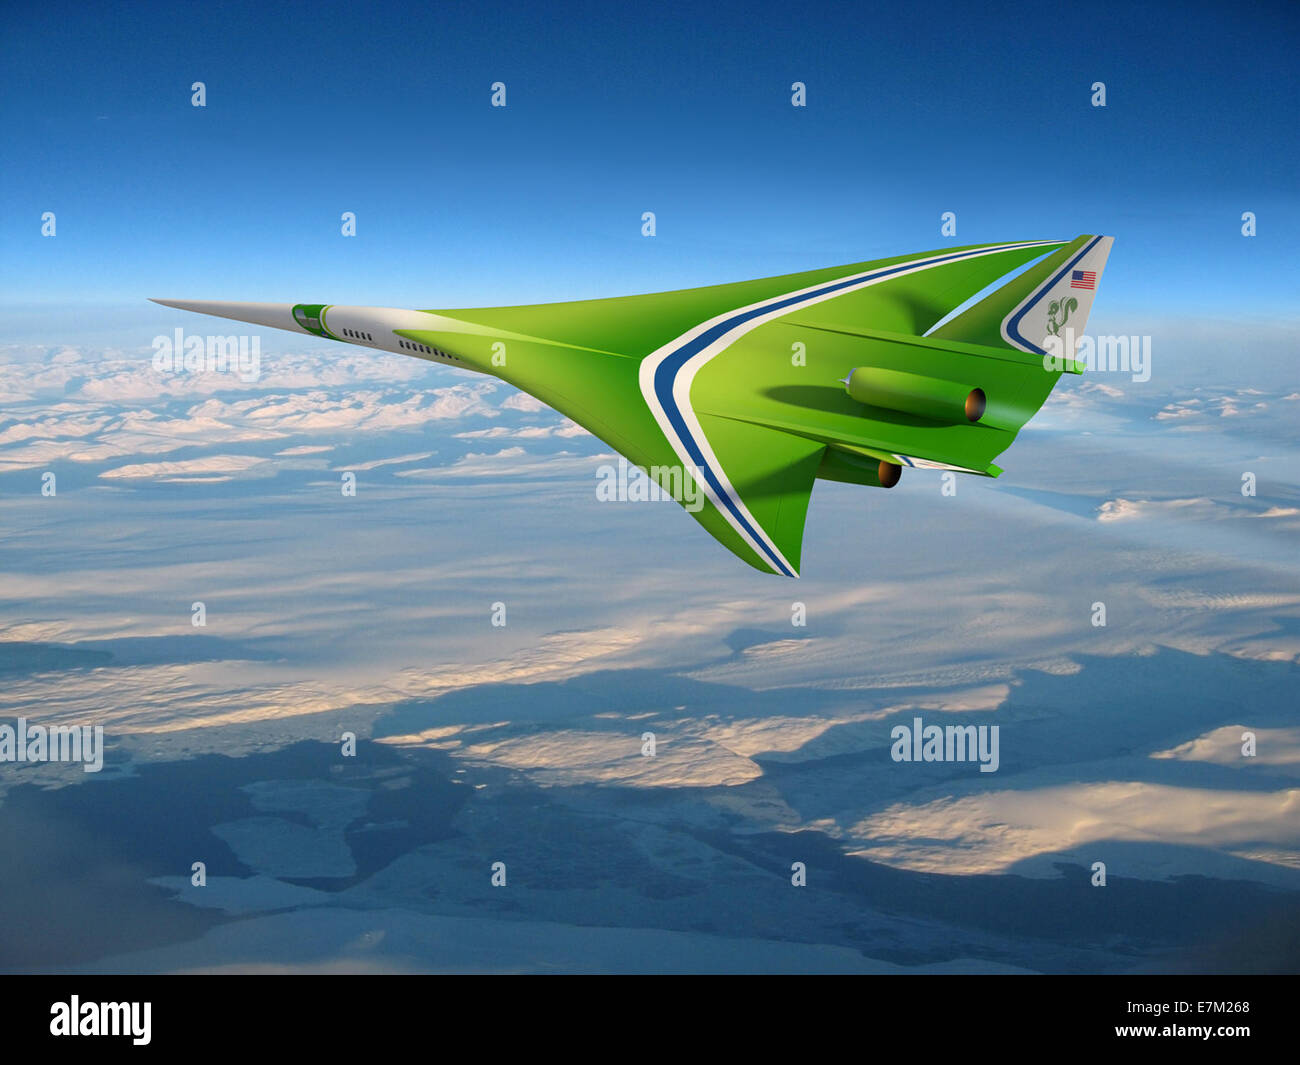 Updated Supersonic This updated future aircraft design concept from NASA research partner Lockheed Martin Stock Photo